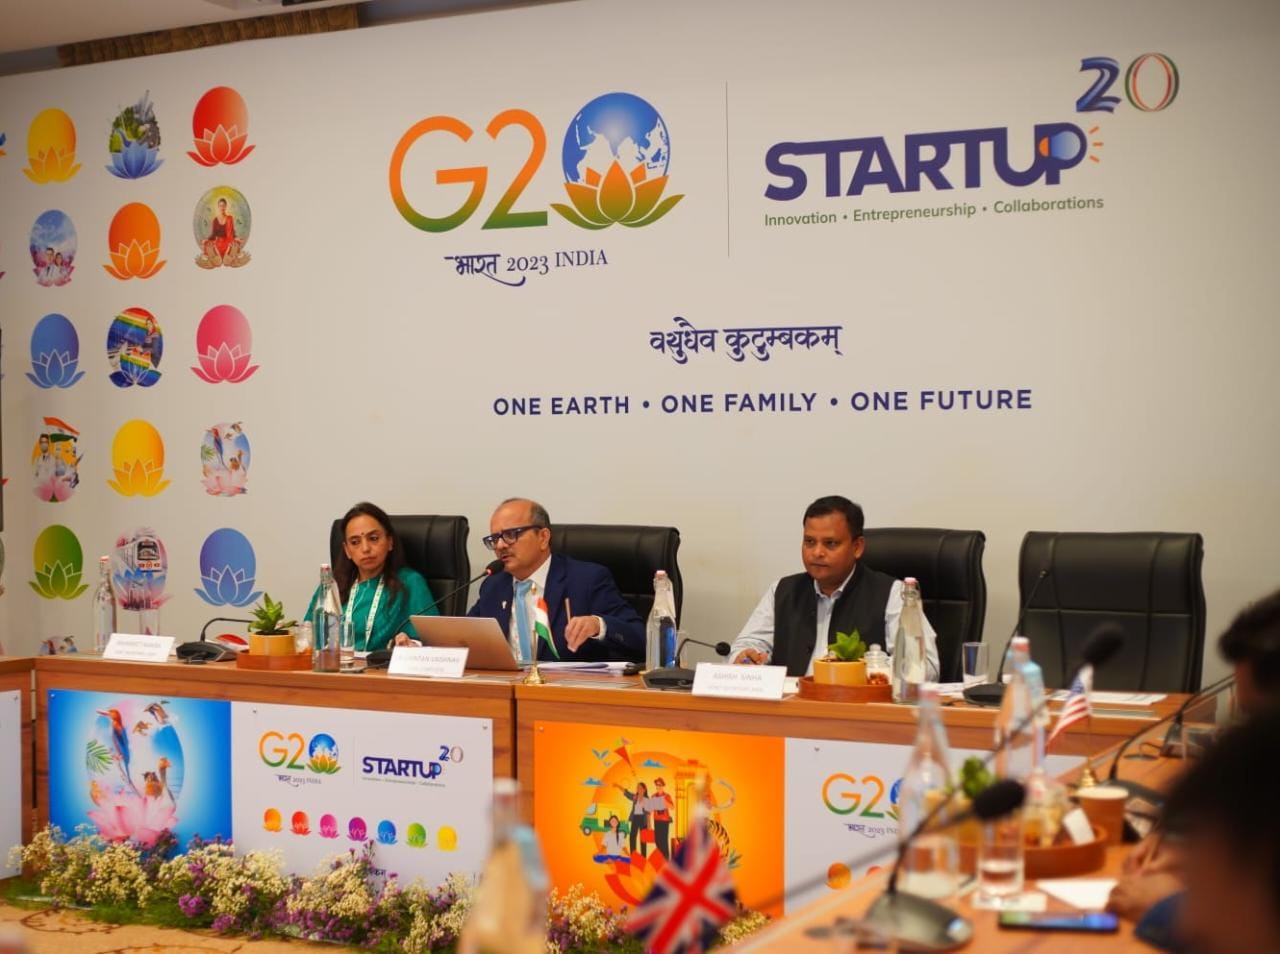 At Startup20’s 3rd meeting in Goa, G20 nations join forces to propel global startup ecosystem growth and innovation